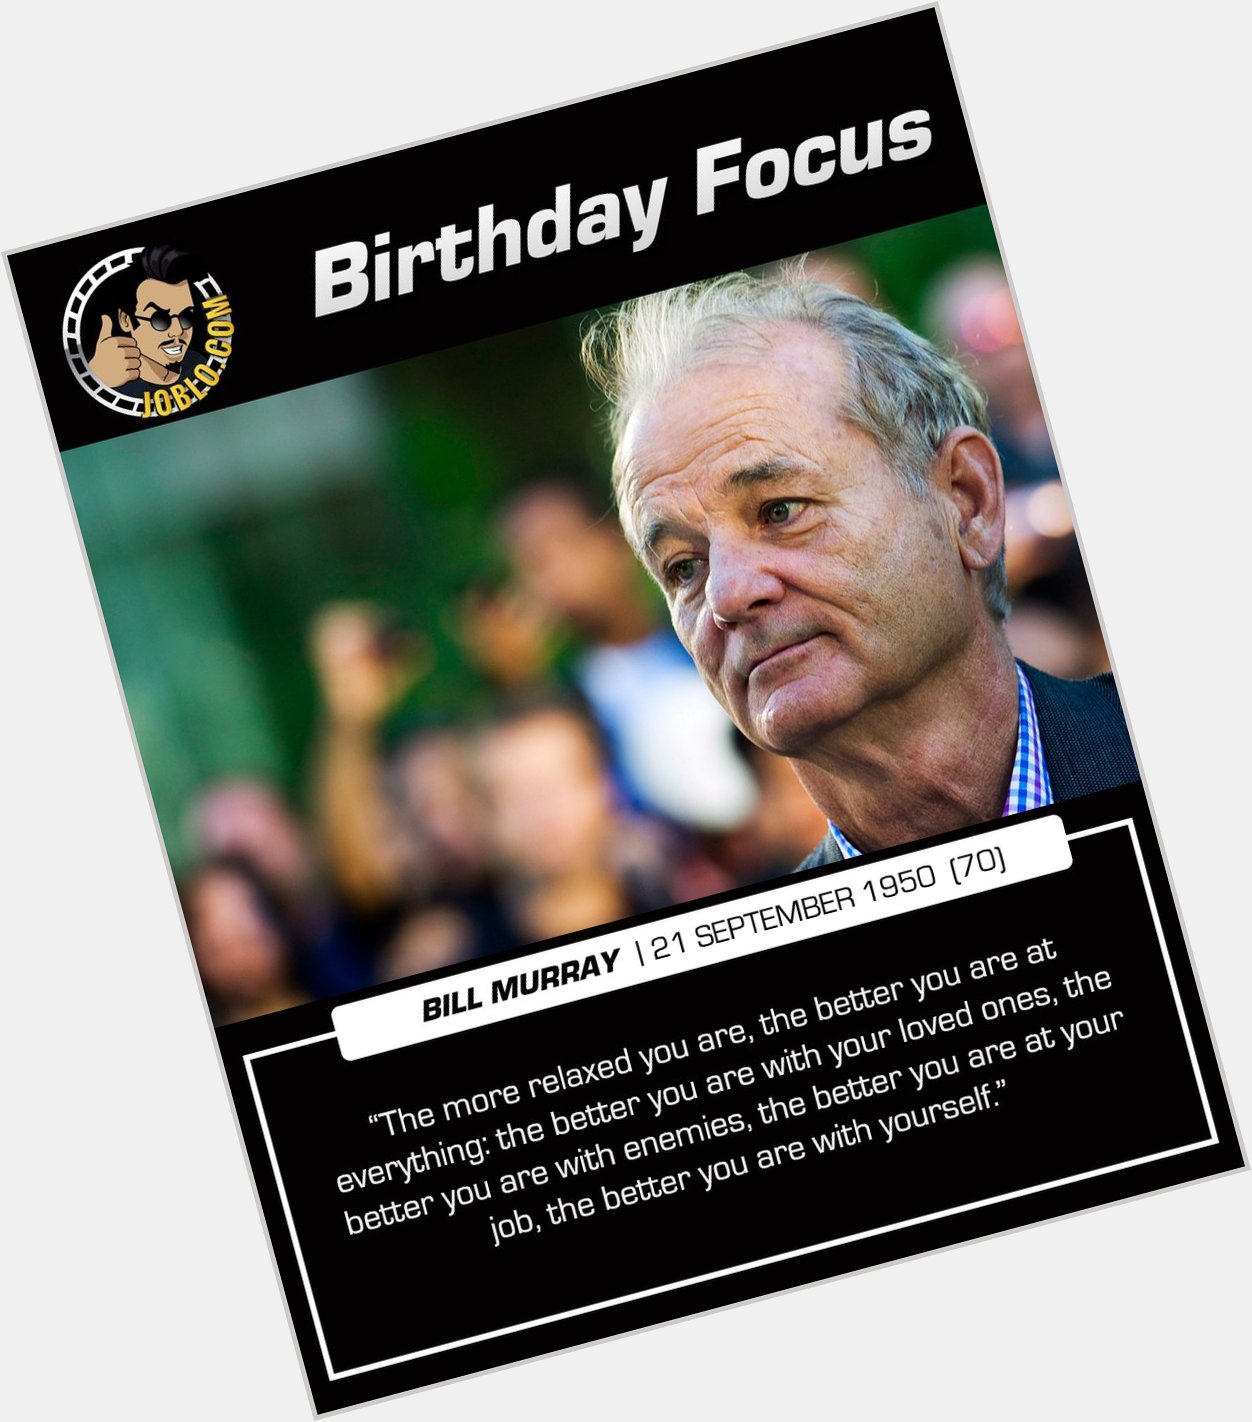 Happy 70th birthday to Bill Murray!

What is your favorite performance of his? 